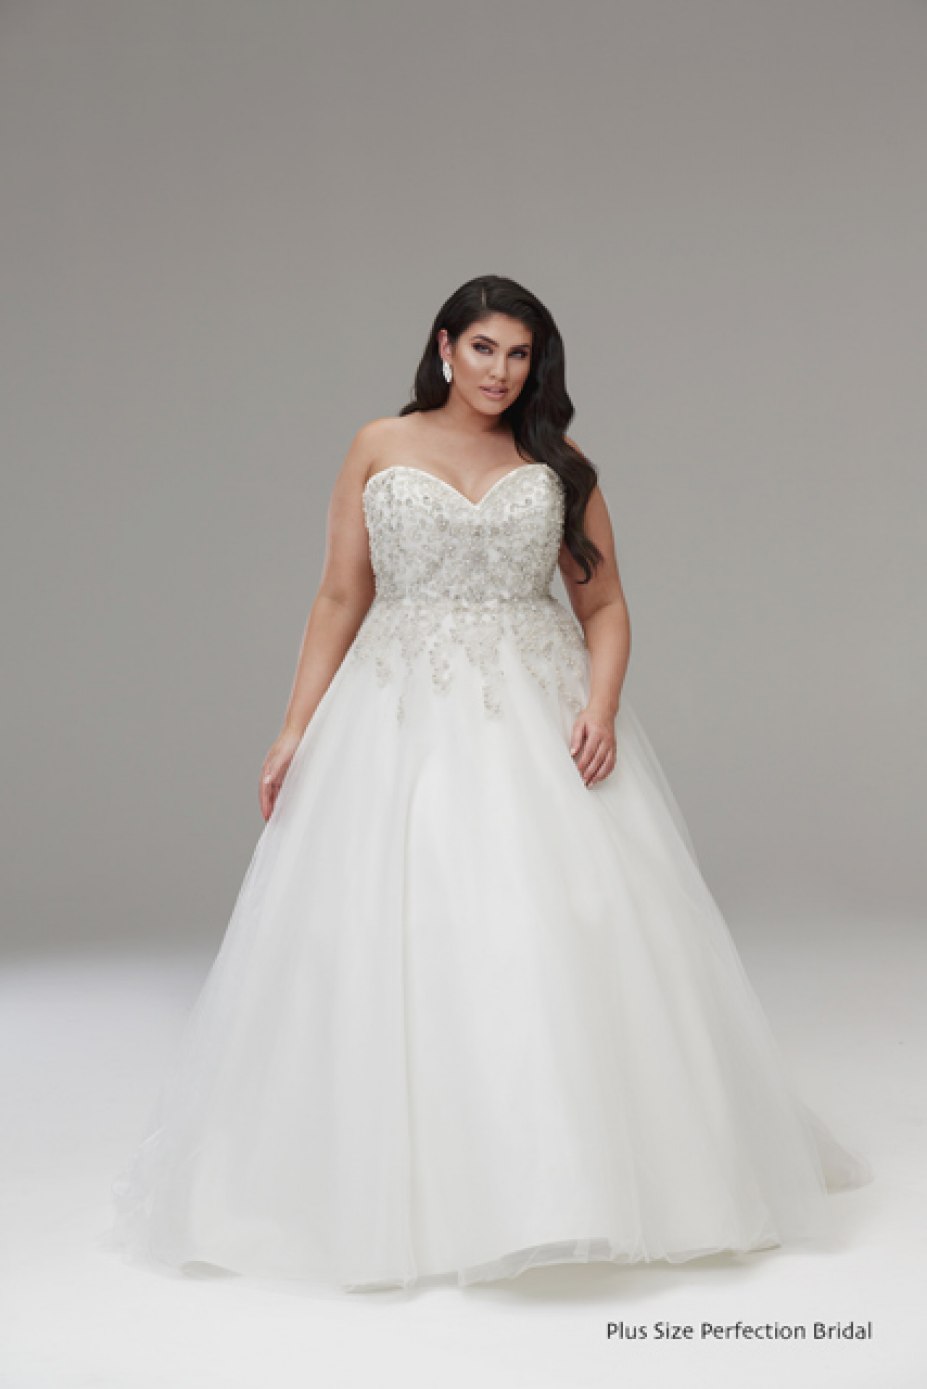 Plus Size Princess Wedding Dresses Awesome Wedding Dresses Plus Size  Specialists Melbourne Size16 to 34 In